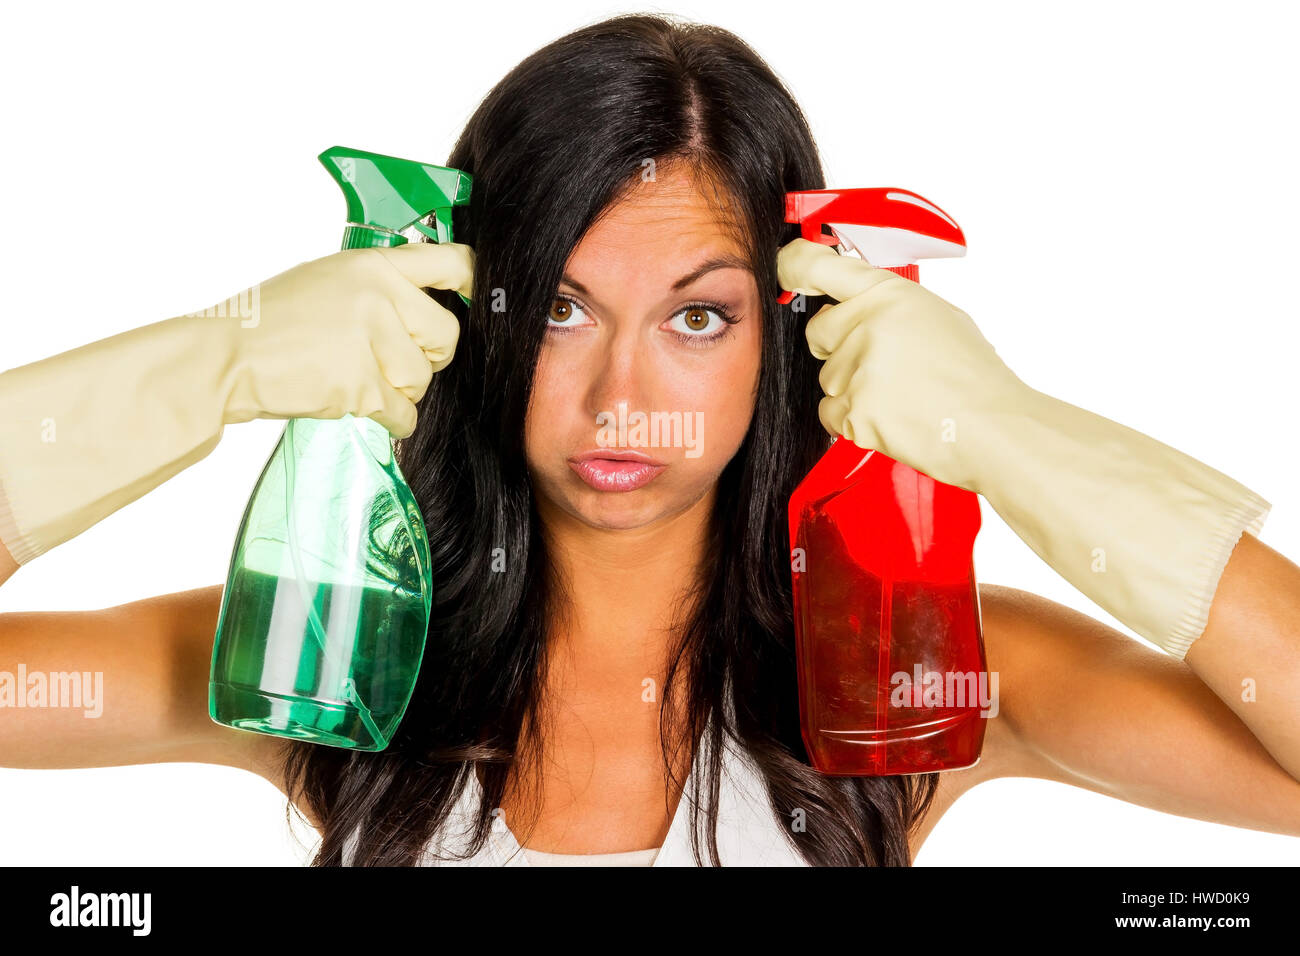 A young woman is unhappily the cleaning must take over, Eine junge Frau ist ungl¸cklich den Hausputz ¸bernehmen muss Stock Photo